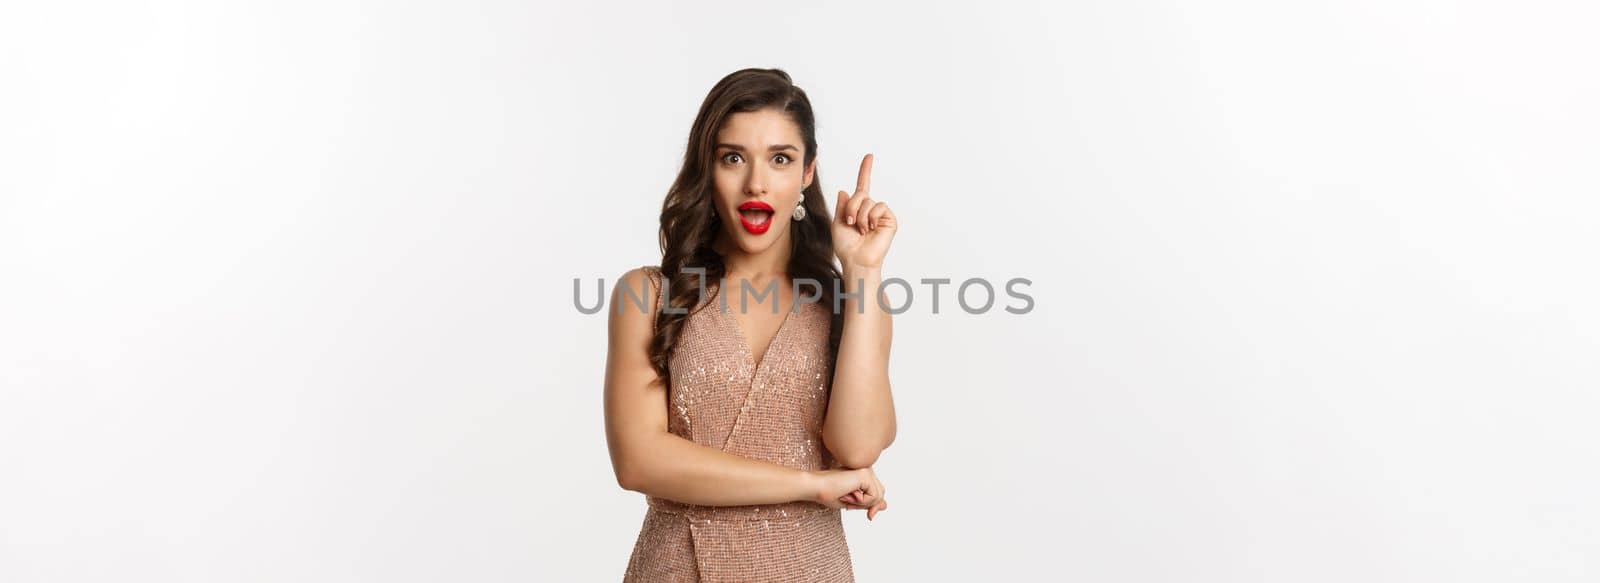 Christmas, holidays and celebration concept. Excited young woman with red lipstick, party dress, having an idea, raising finger in eureka gesture, suggesting something, white background.